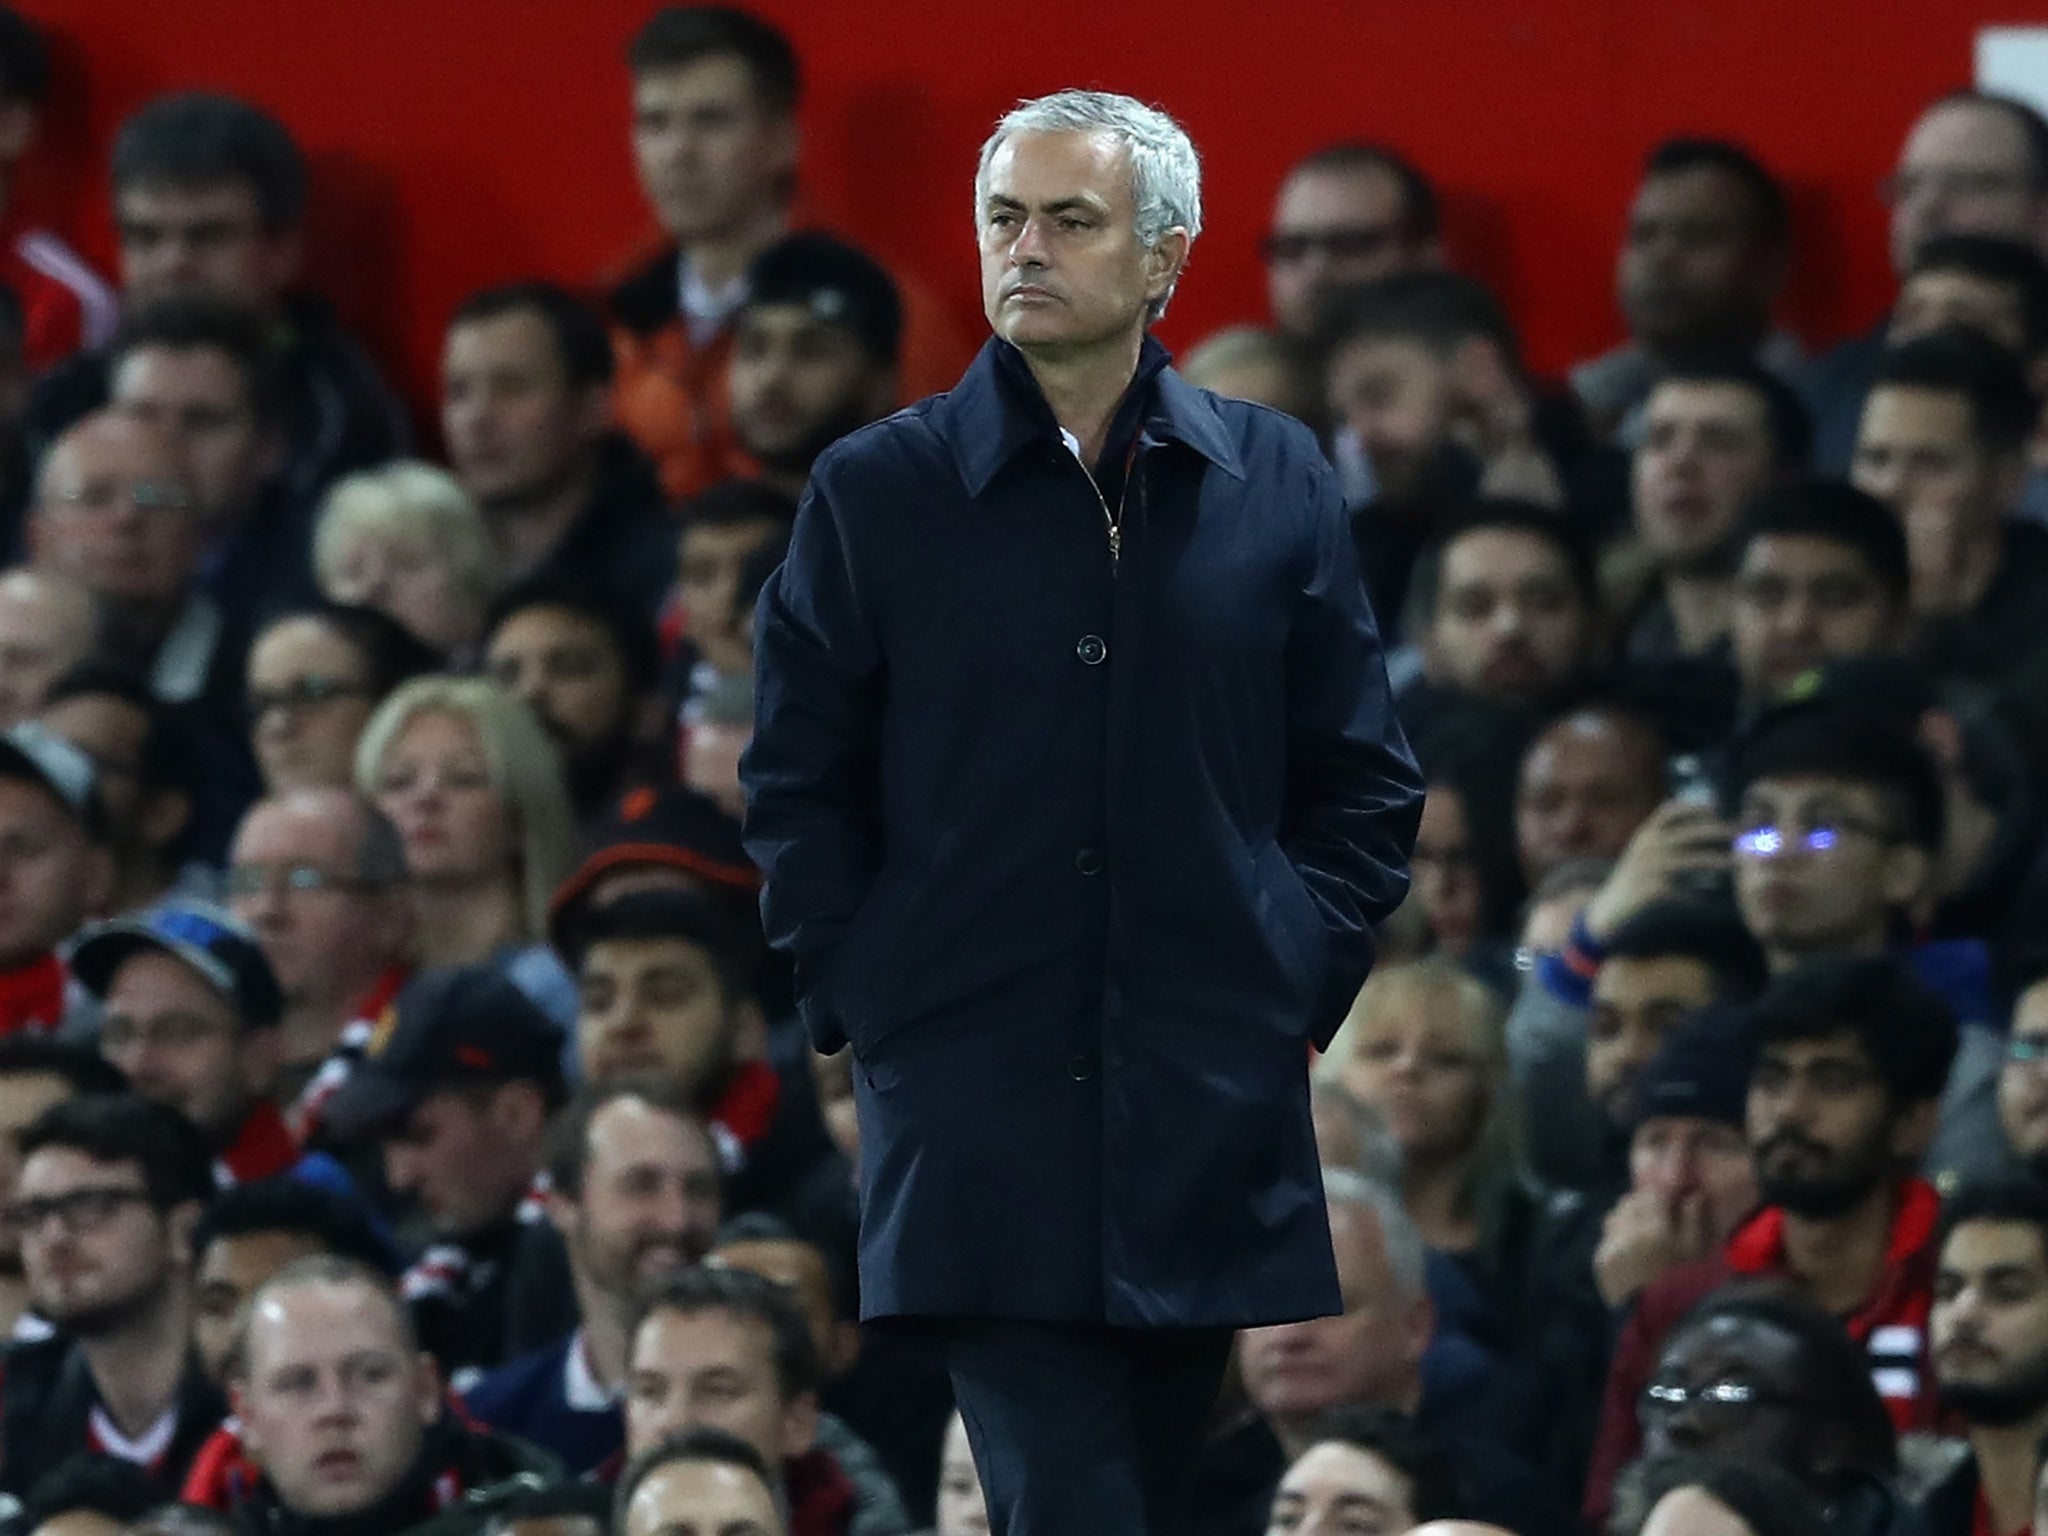 Mourinho stands on the Old Trafford touchline in front of United's support